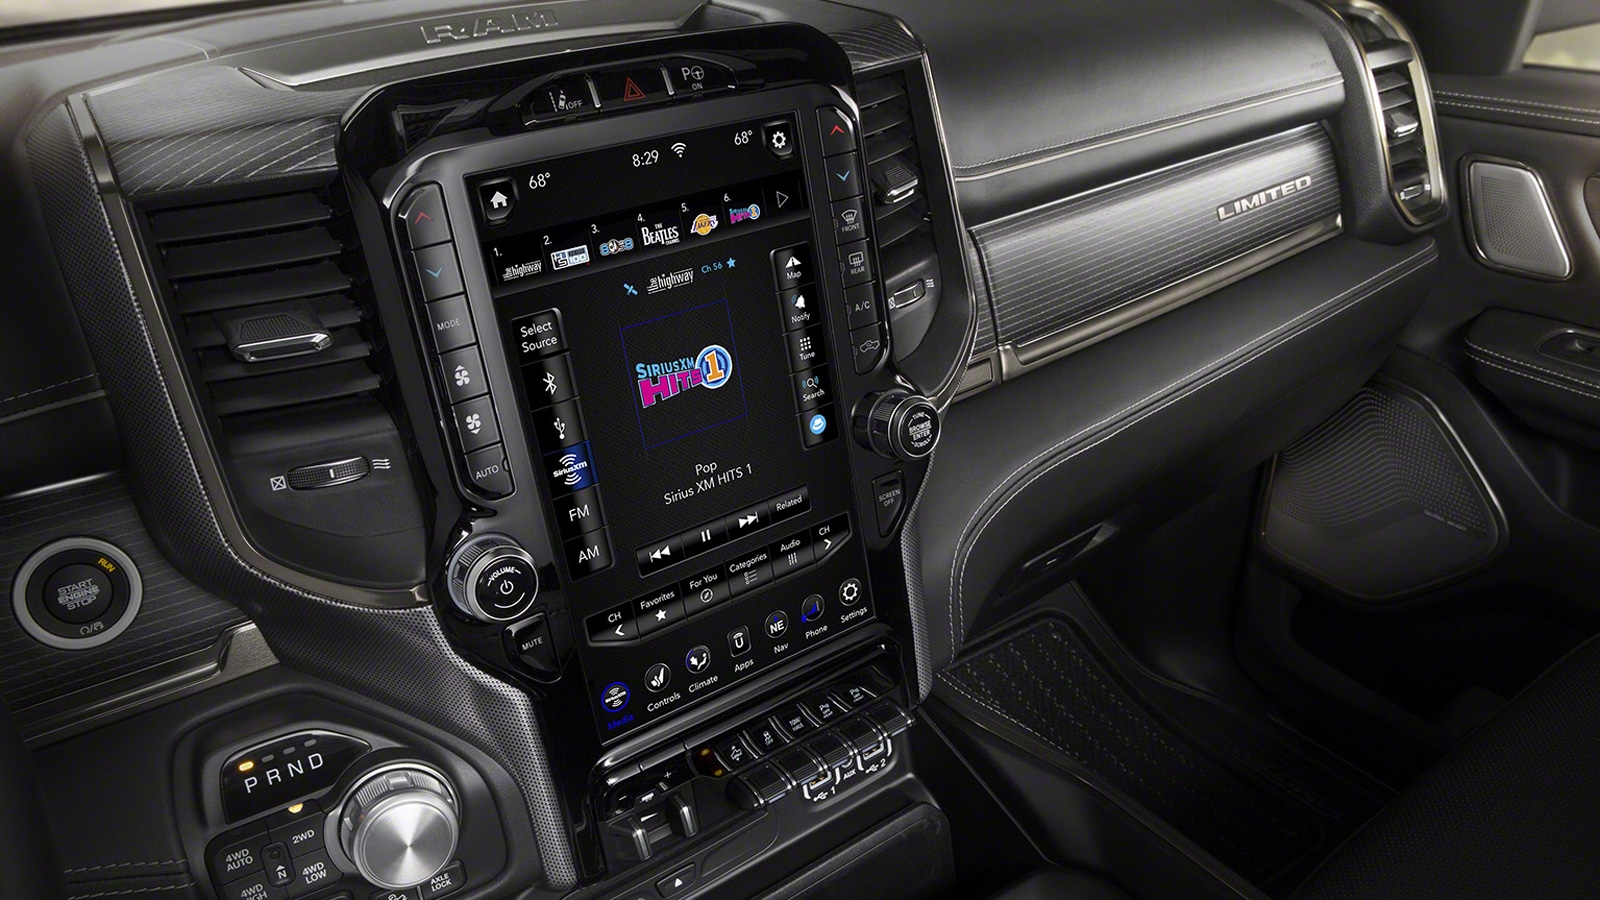 SiriusXM adds streaming-style features to its in-car radio service | DeviceDaily.com